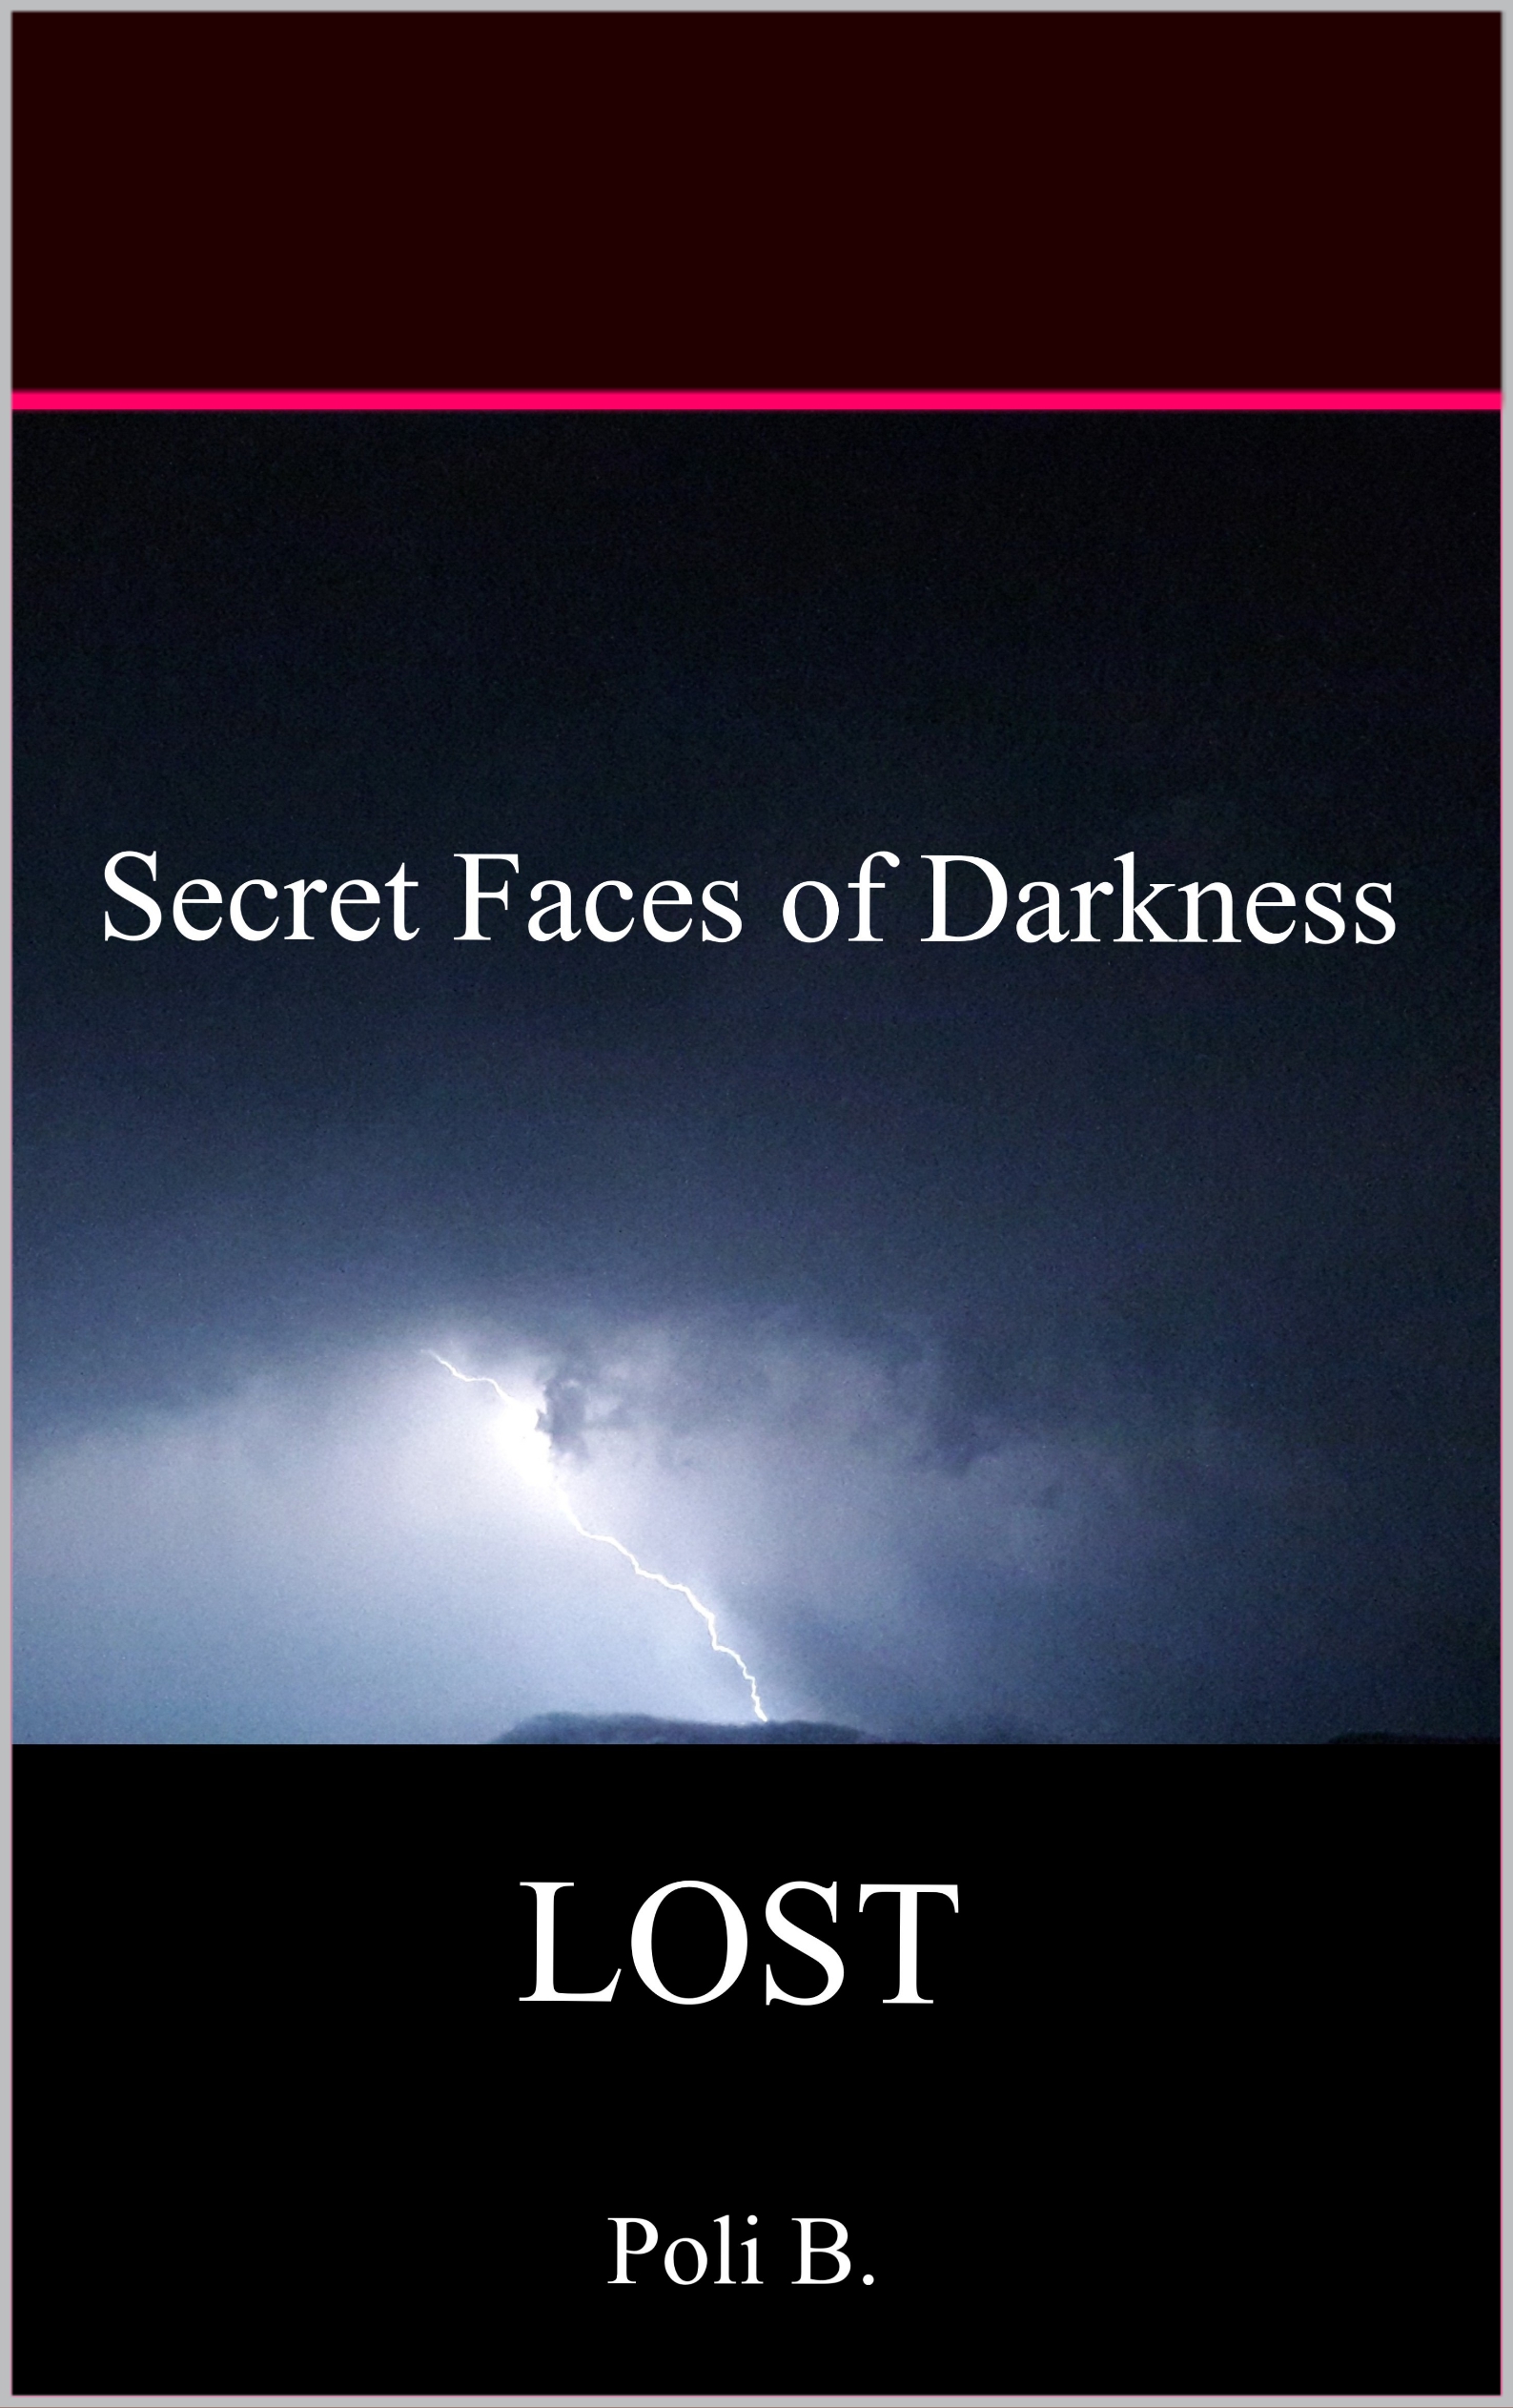 FREE: Secret Faces of Darkness: LOST by Poli B.